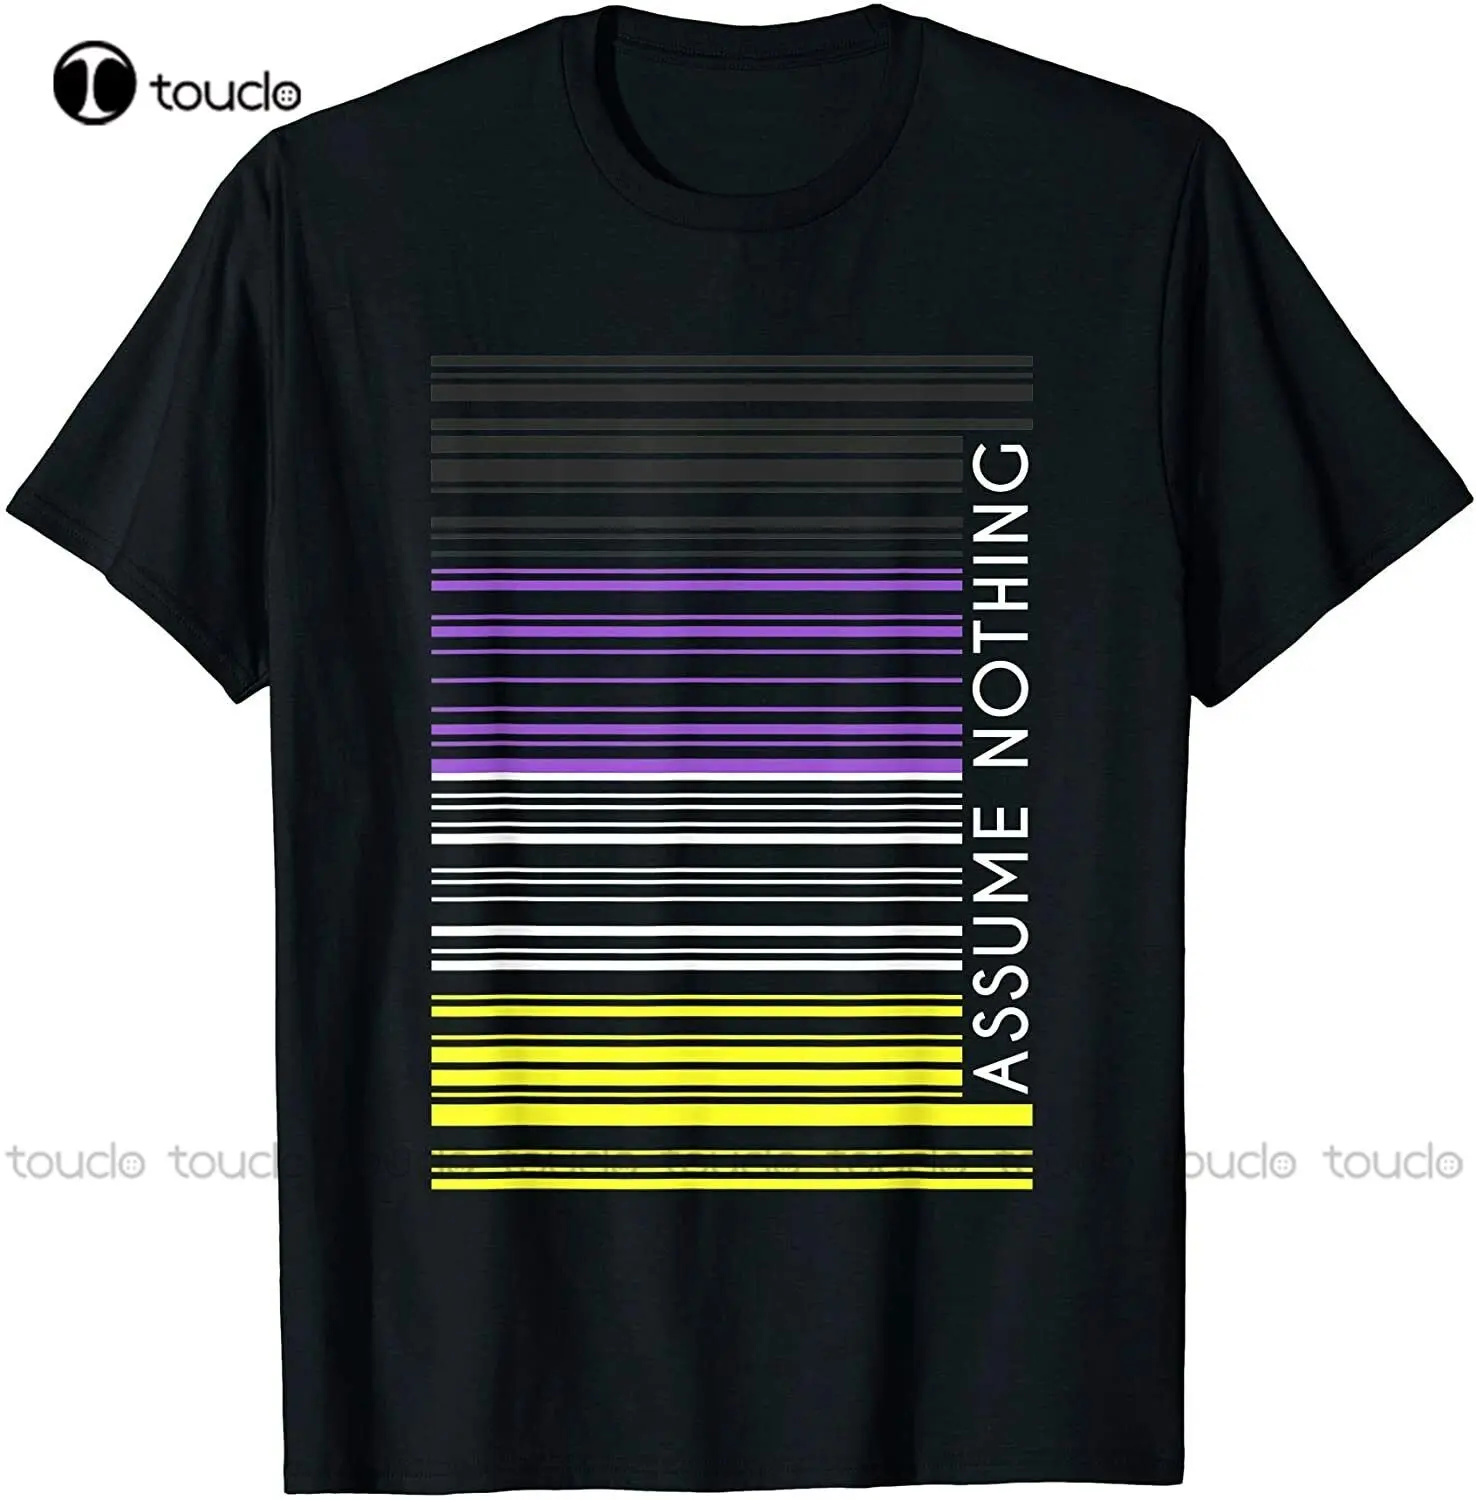 New Limited Assume Nothing Nonbinary Flag Barcode Enby Genderqueer T-Shirt Tshirts For Men Custom Gift Xs-5Xl Streetwear New